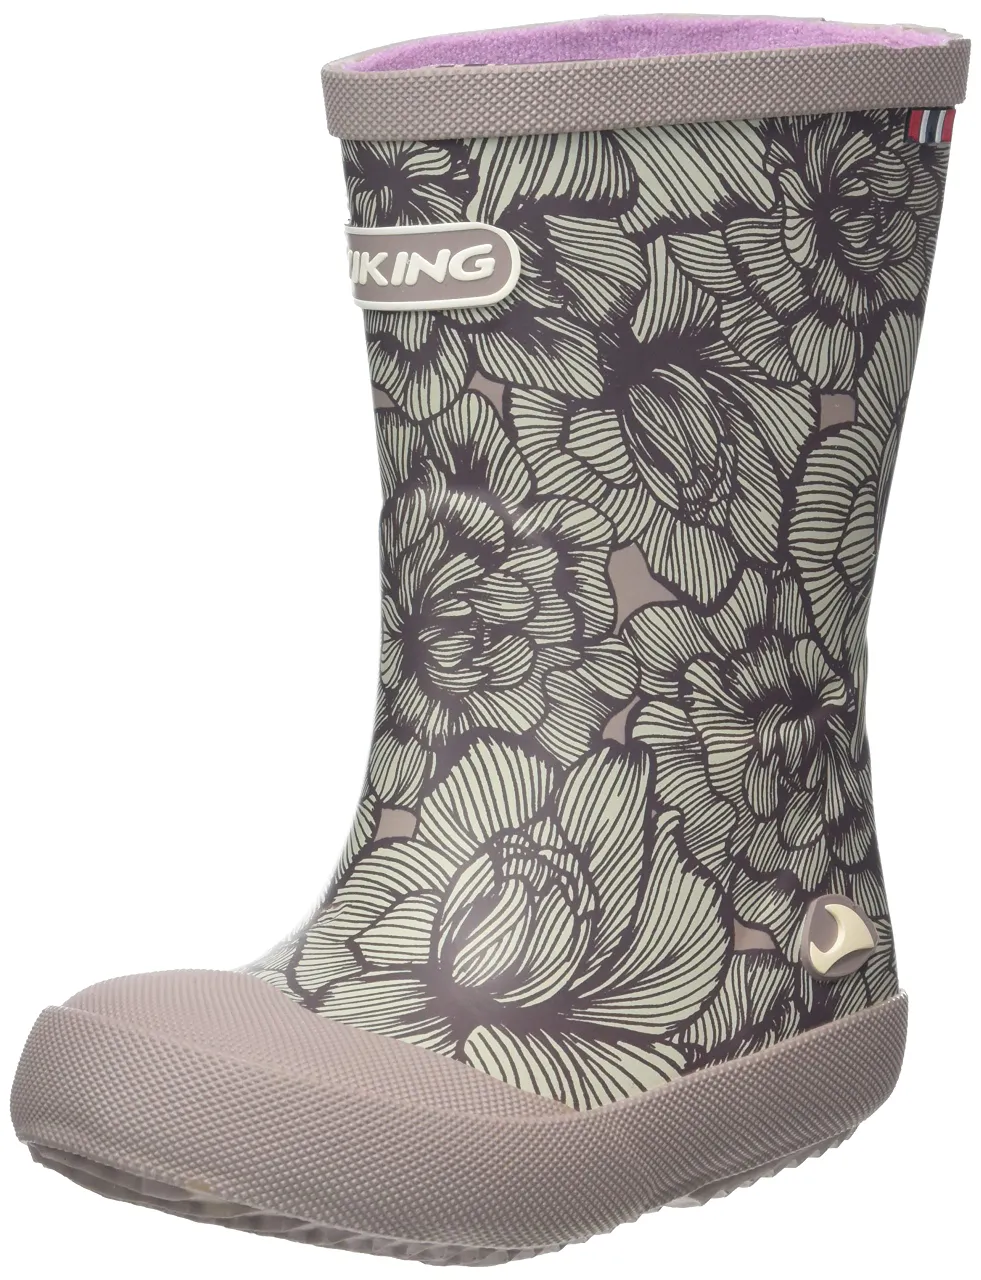 Viking Indie Print Rubber Boots